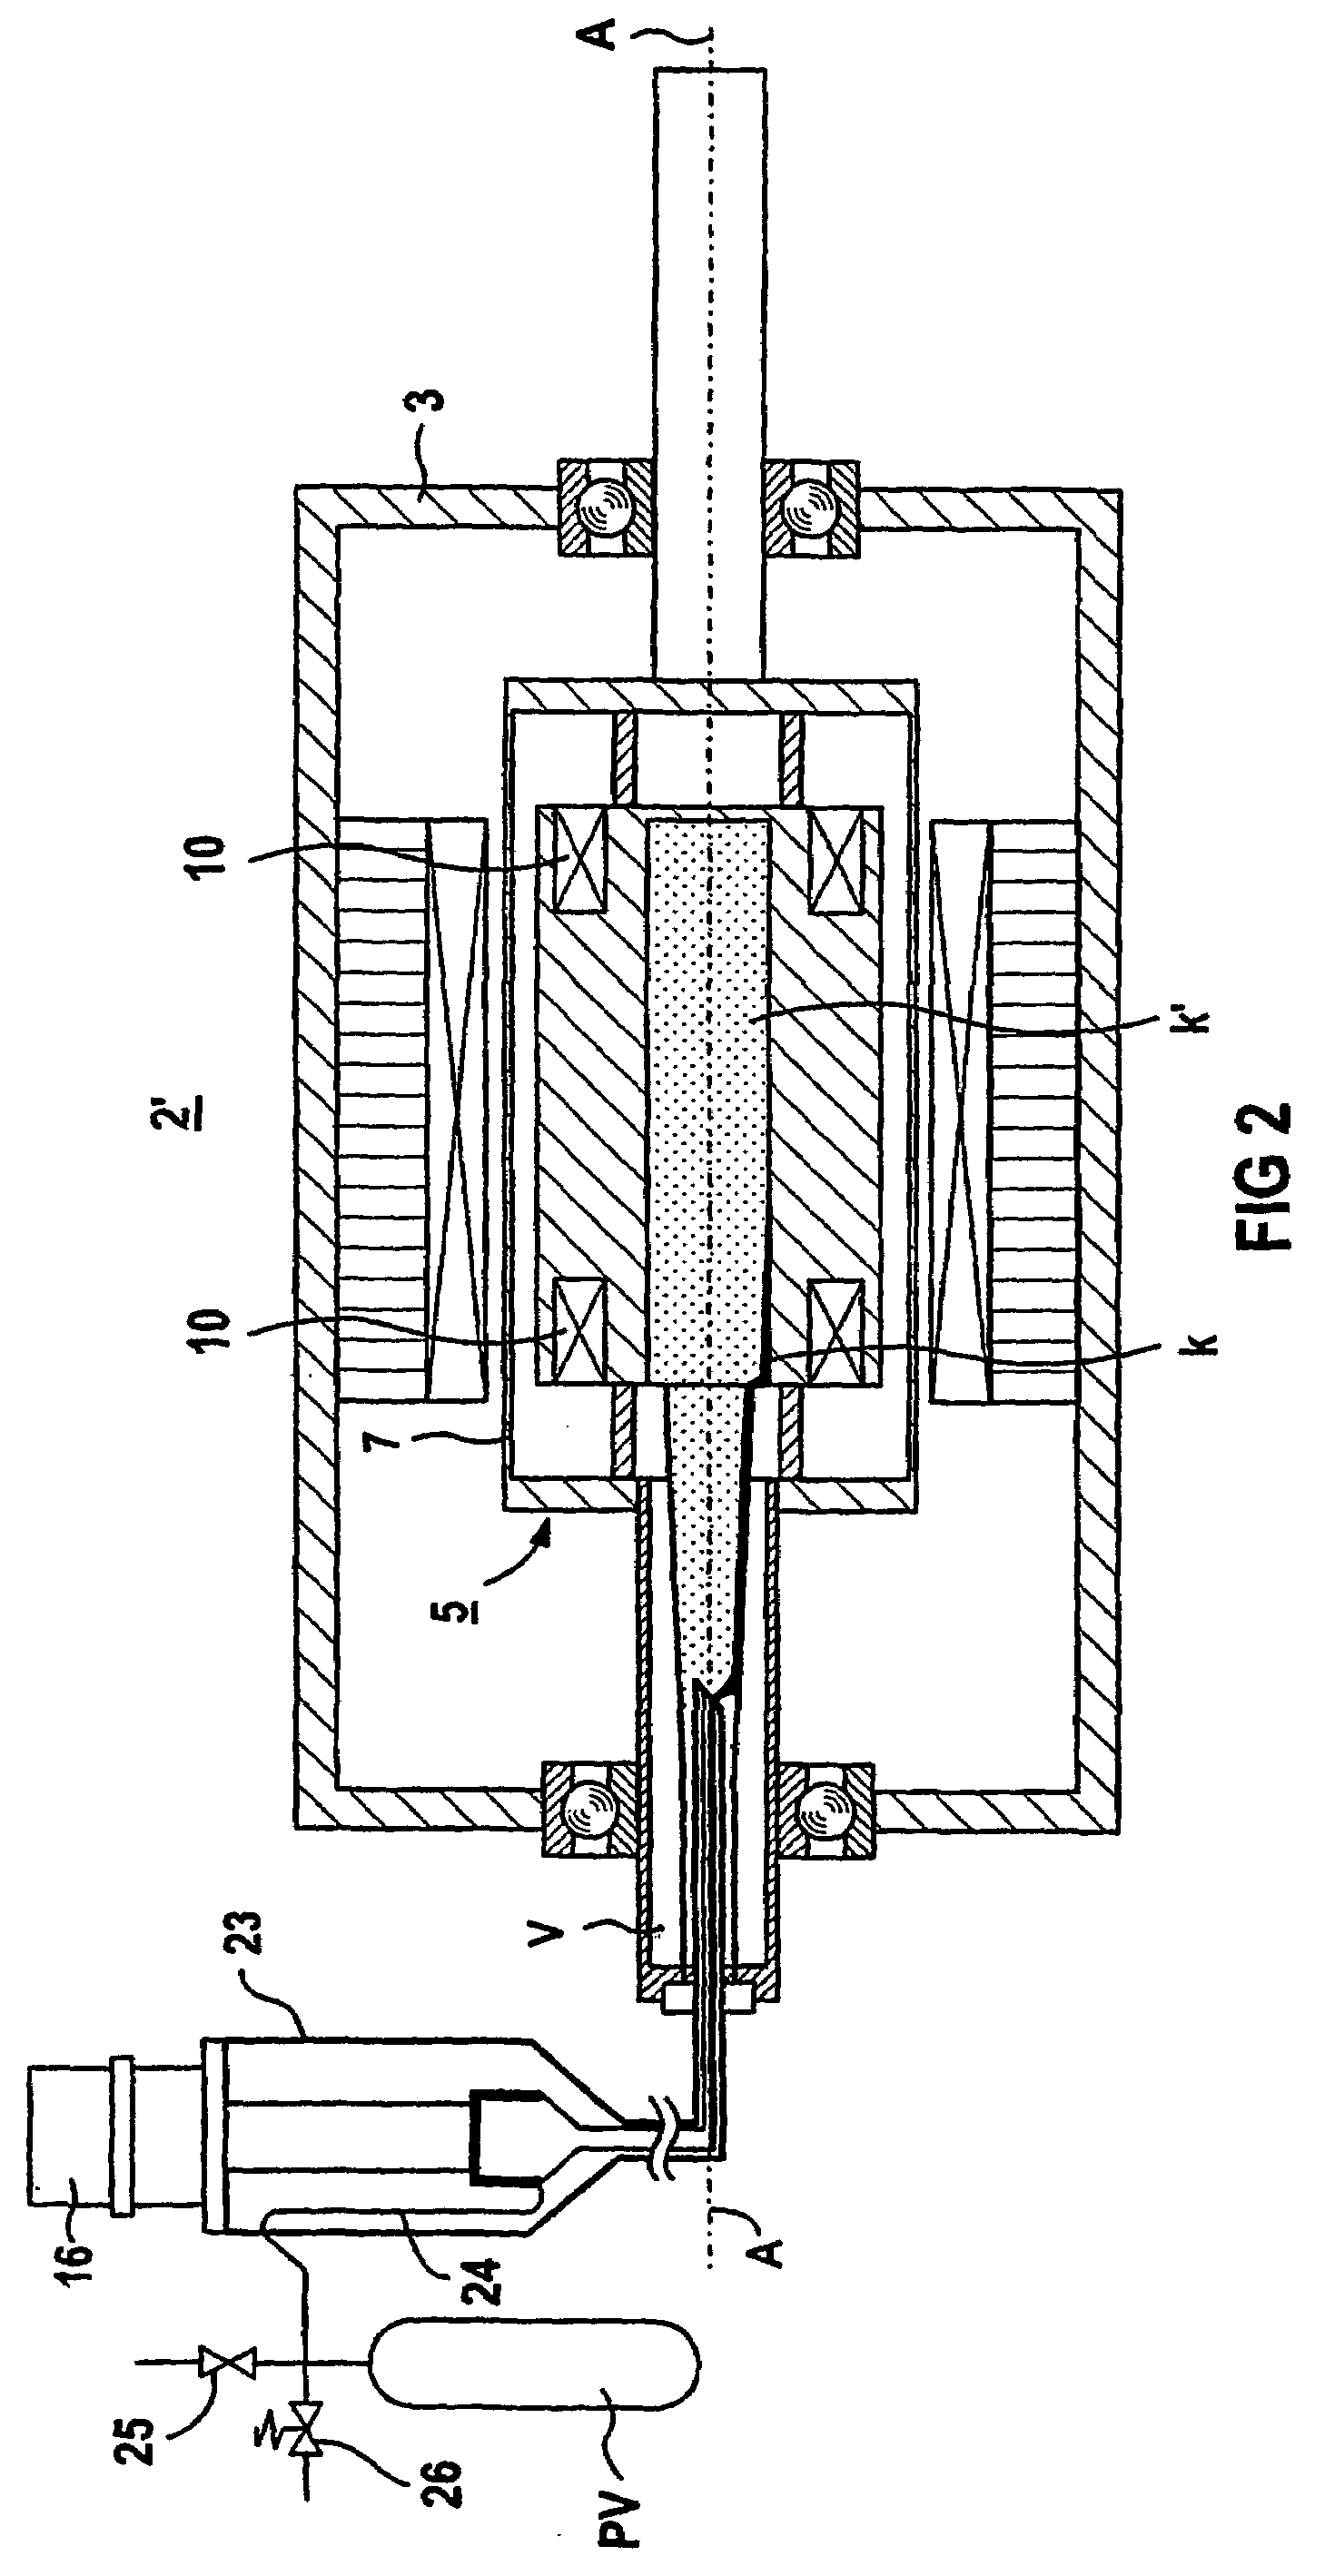 Superconducting device with a cooling-unit cold head thermally coupled to a rotating superconductive winding